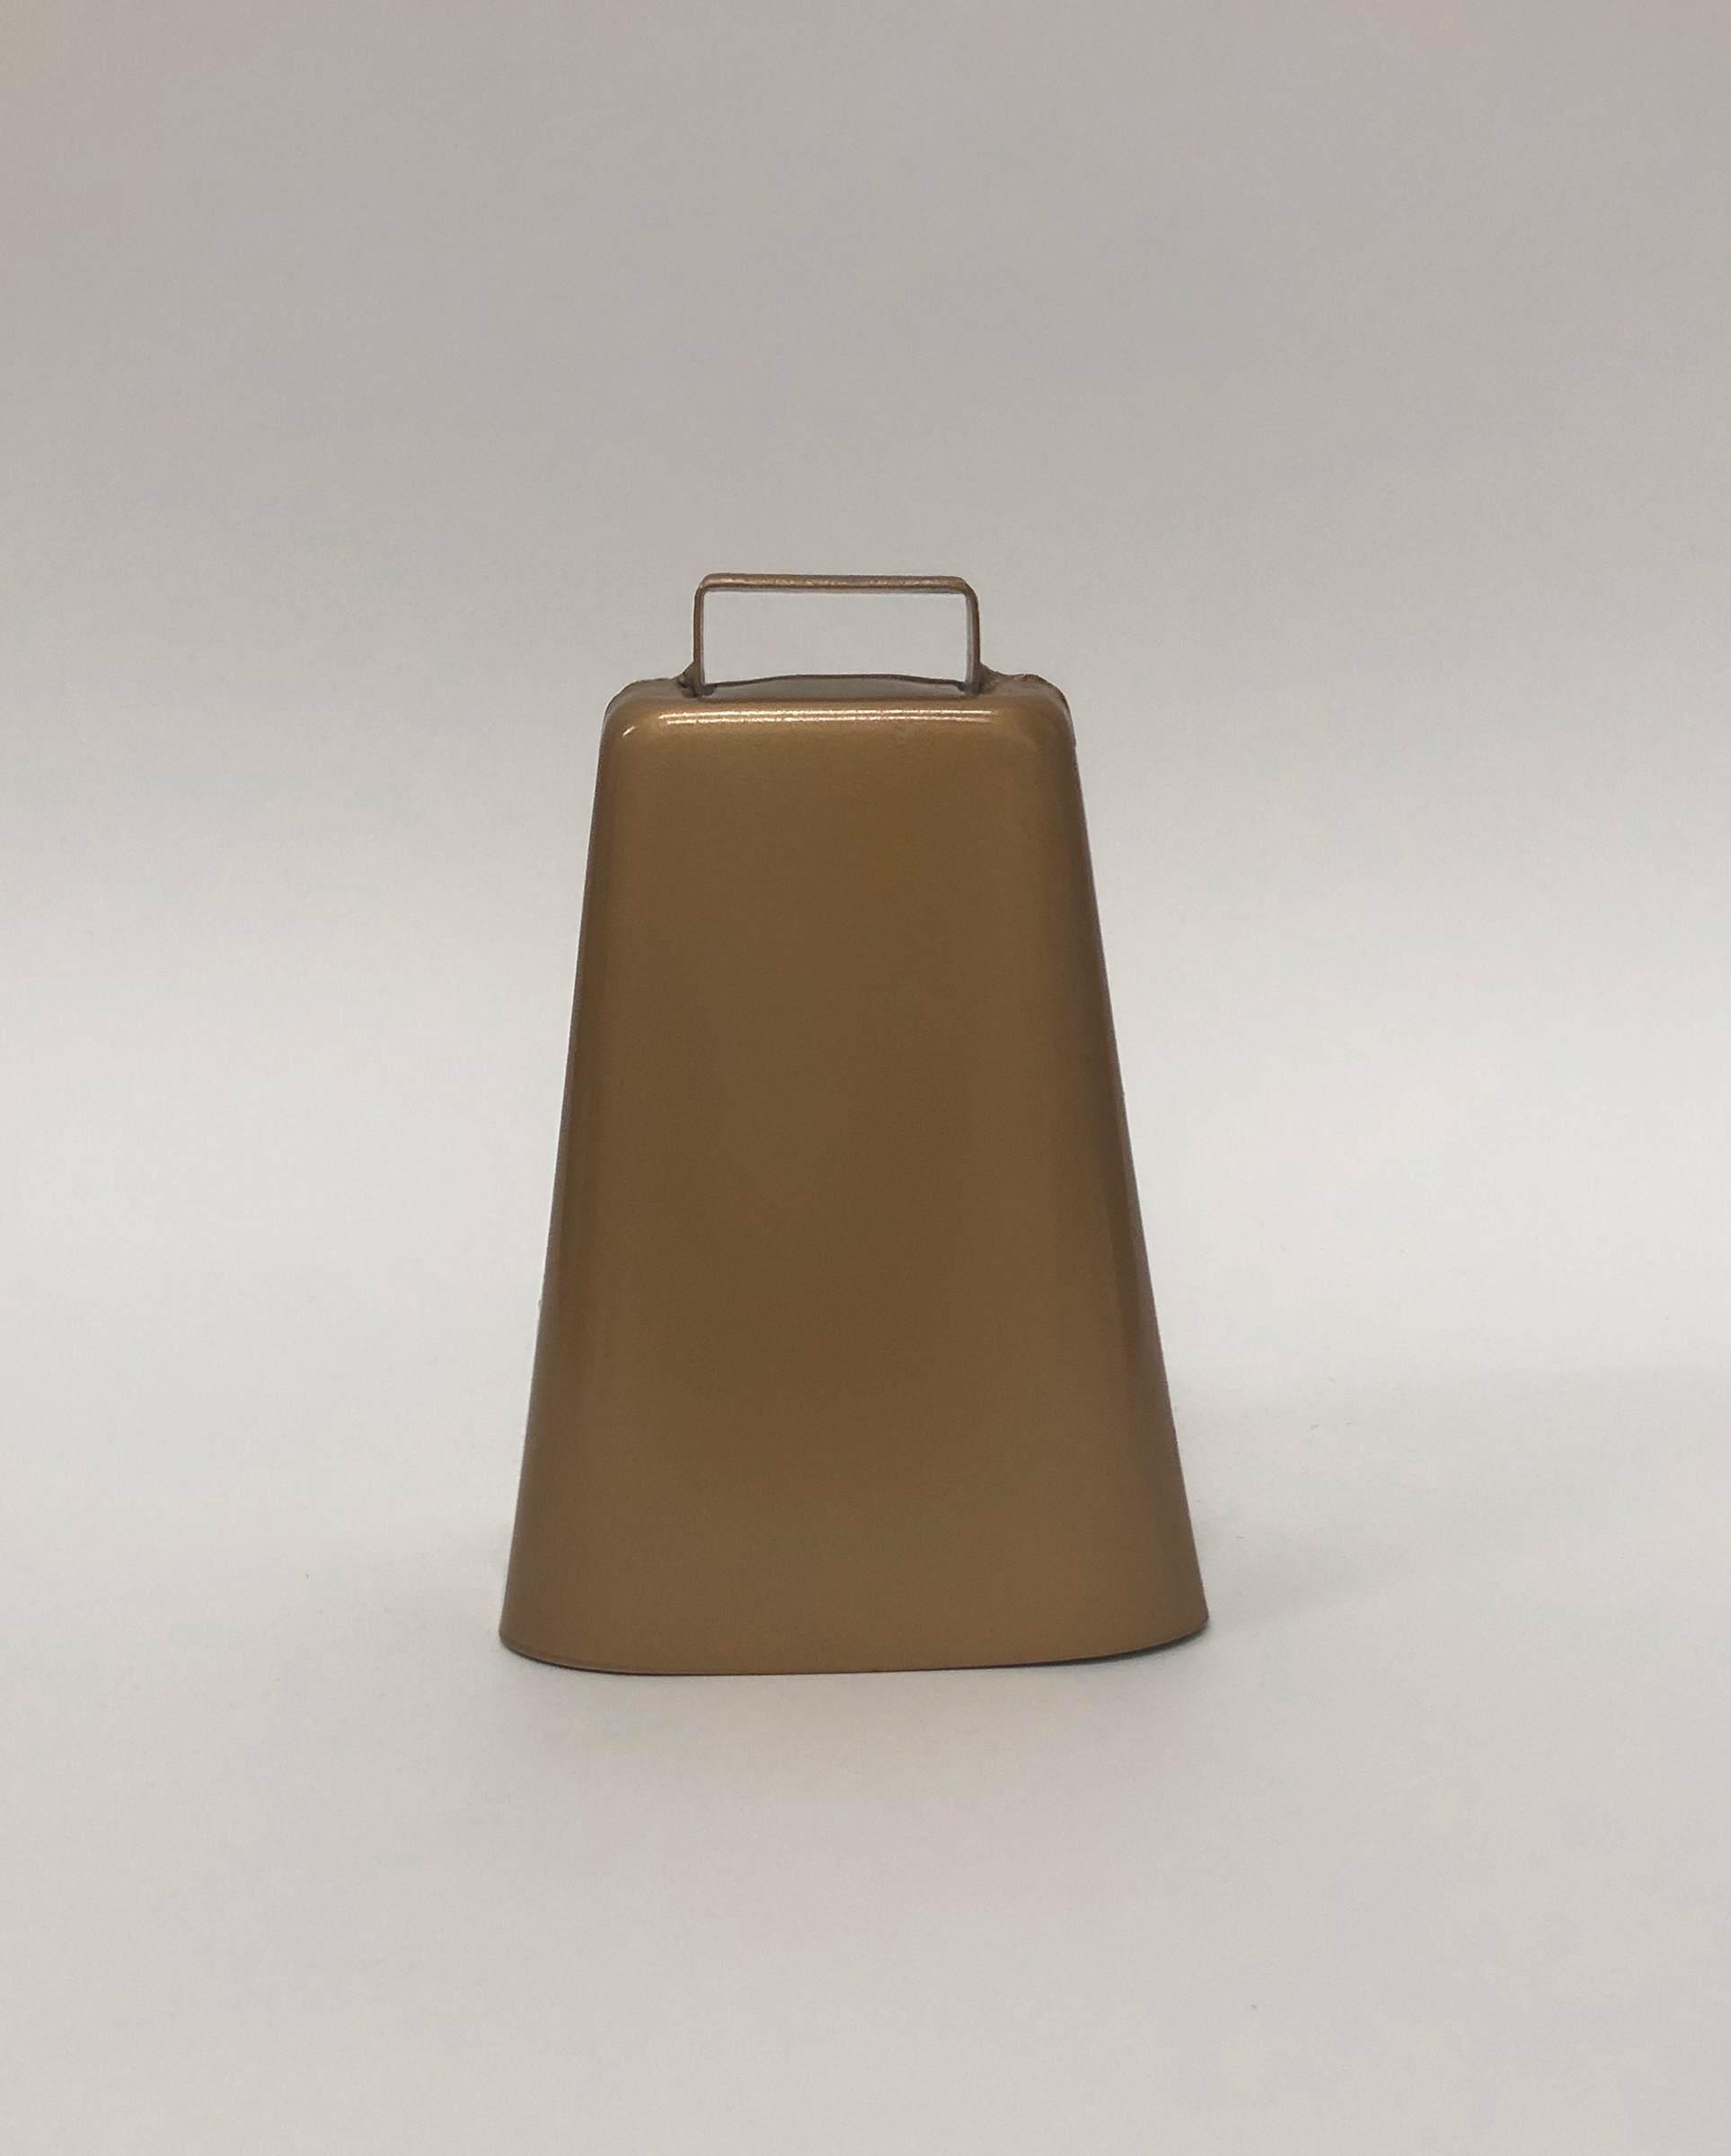 The cowbell that staff at the Samaritan’s Purse field hospital in Central Park would ring every time they’d discharge a patient